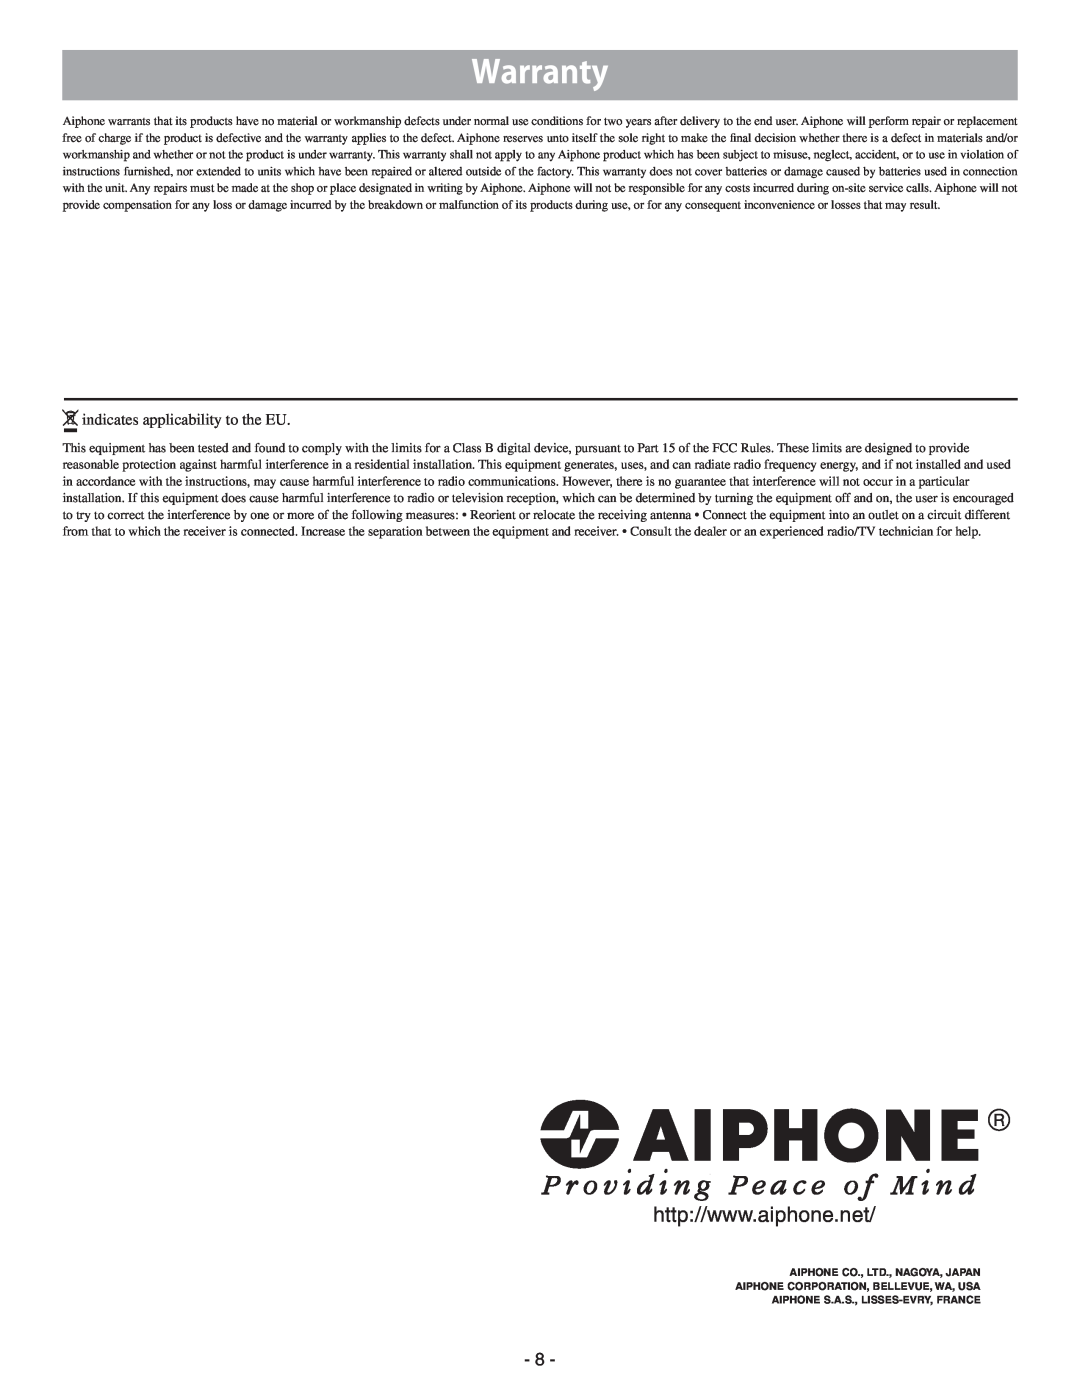 Aiphone GT-1D service manual indicates applicability to the EU, Aiphone Corporation, Bellevue, Wa, Usa 